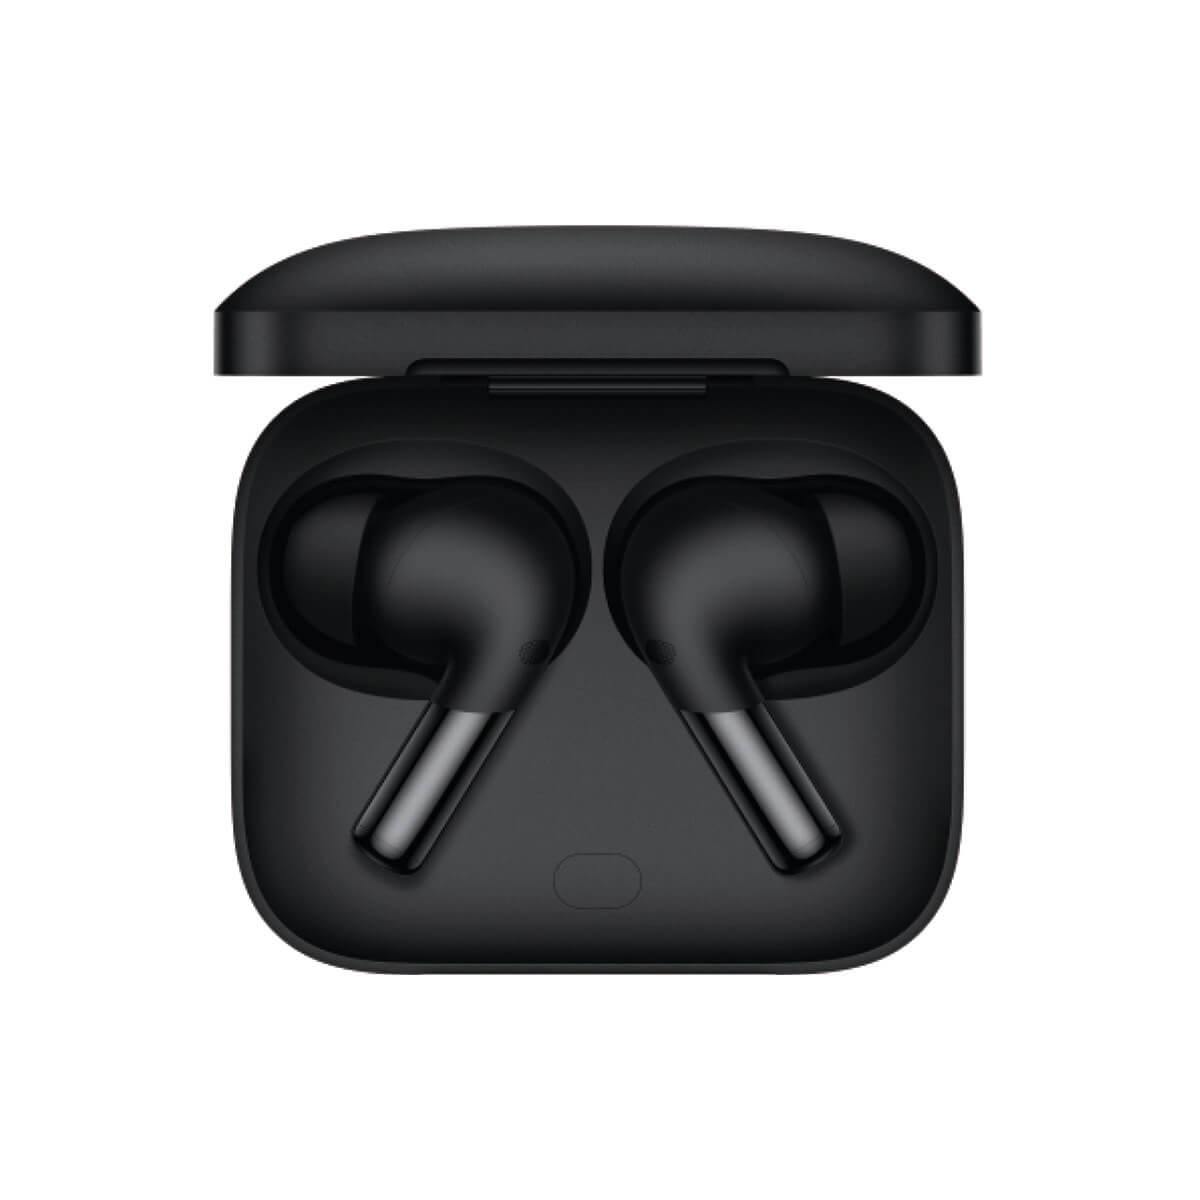 ONEPLUS BUDS PRO 2 AURICULARES BLUETOOTH NEGRO (OBSIDIAN BLACK)